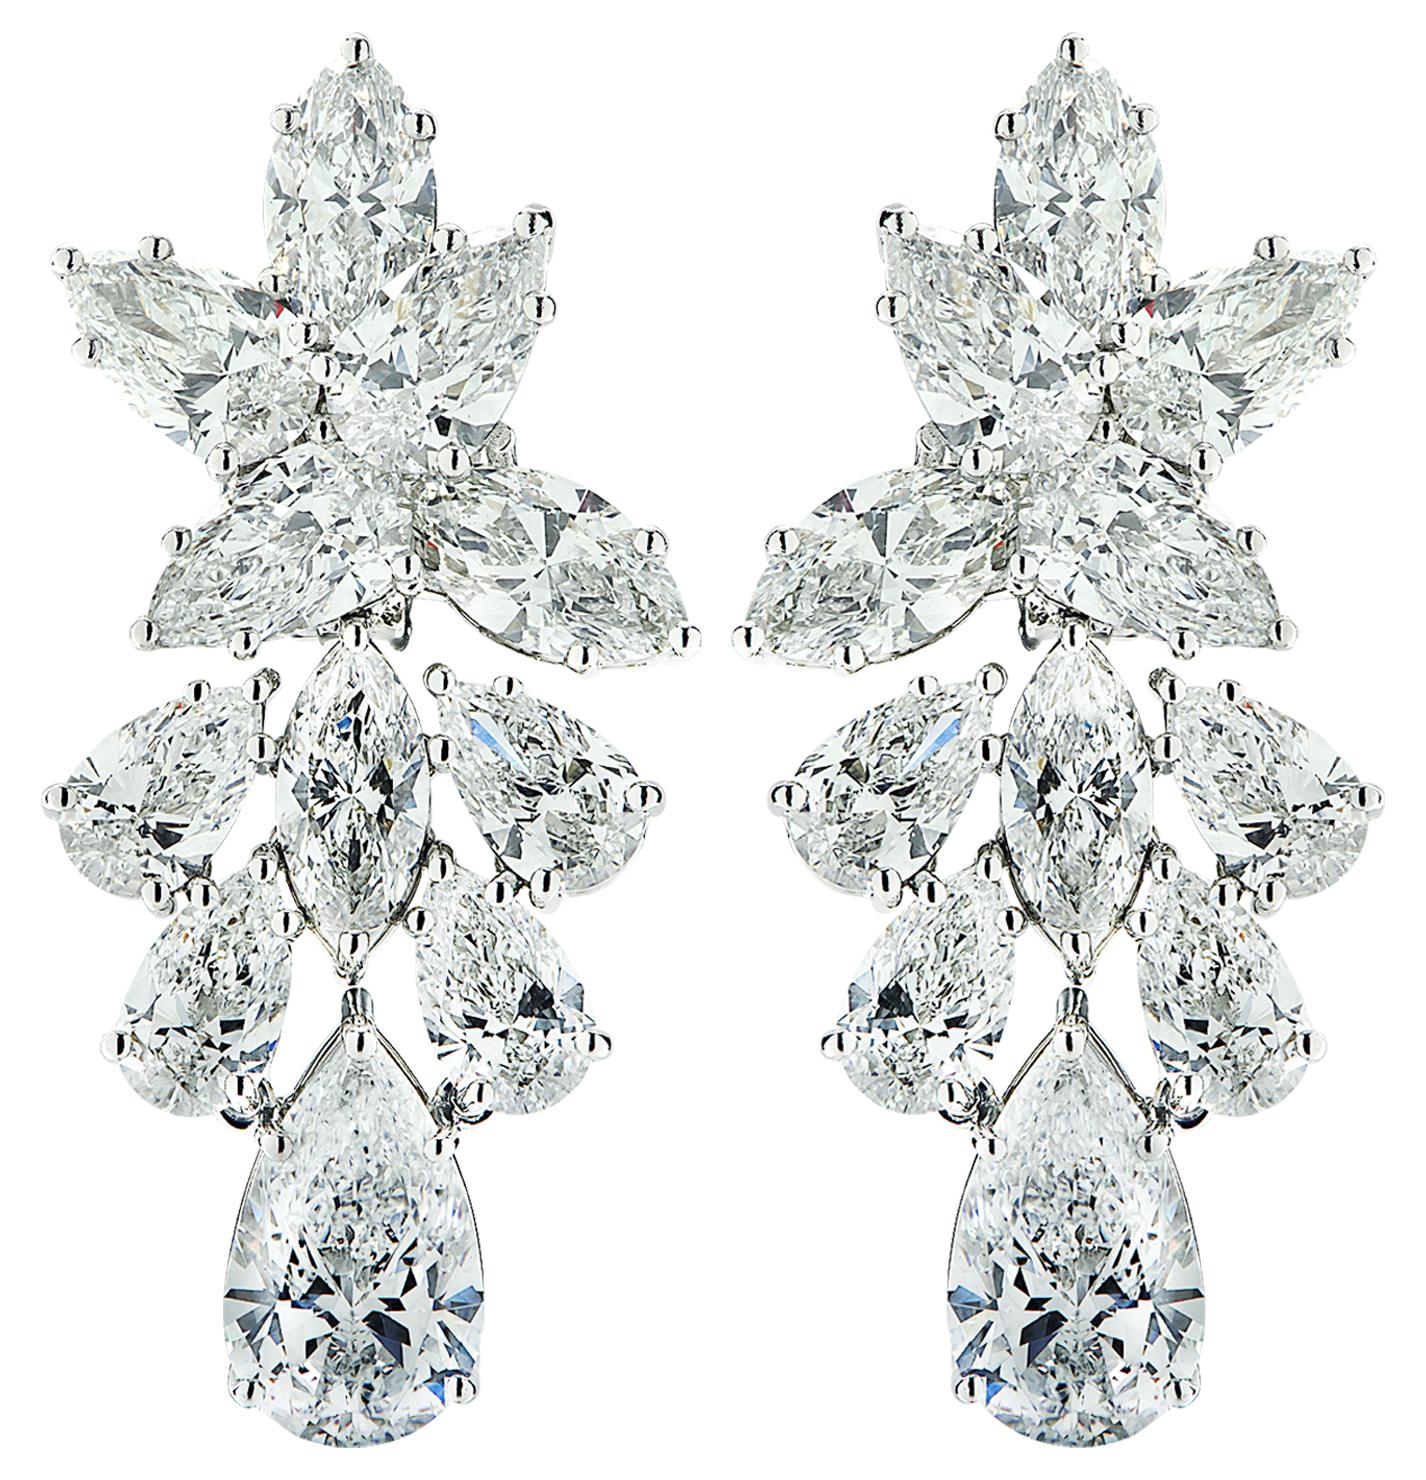 Sensational Vivid Diamonds diamond dangle earrings, finely crafted by hand in platinum, showcasing a spectacular collection of GIA certified pear shape diamonds and marquise cut diamonds weighing 15.85 carats total, D-F color, VS-SI clarity, The